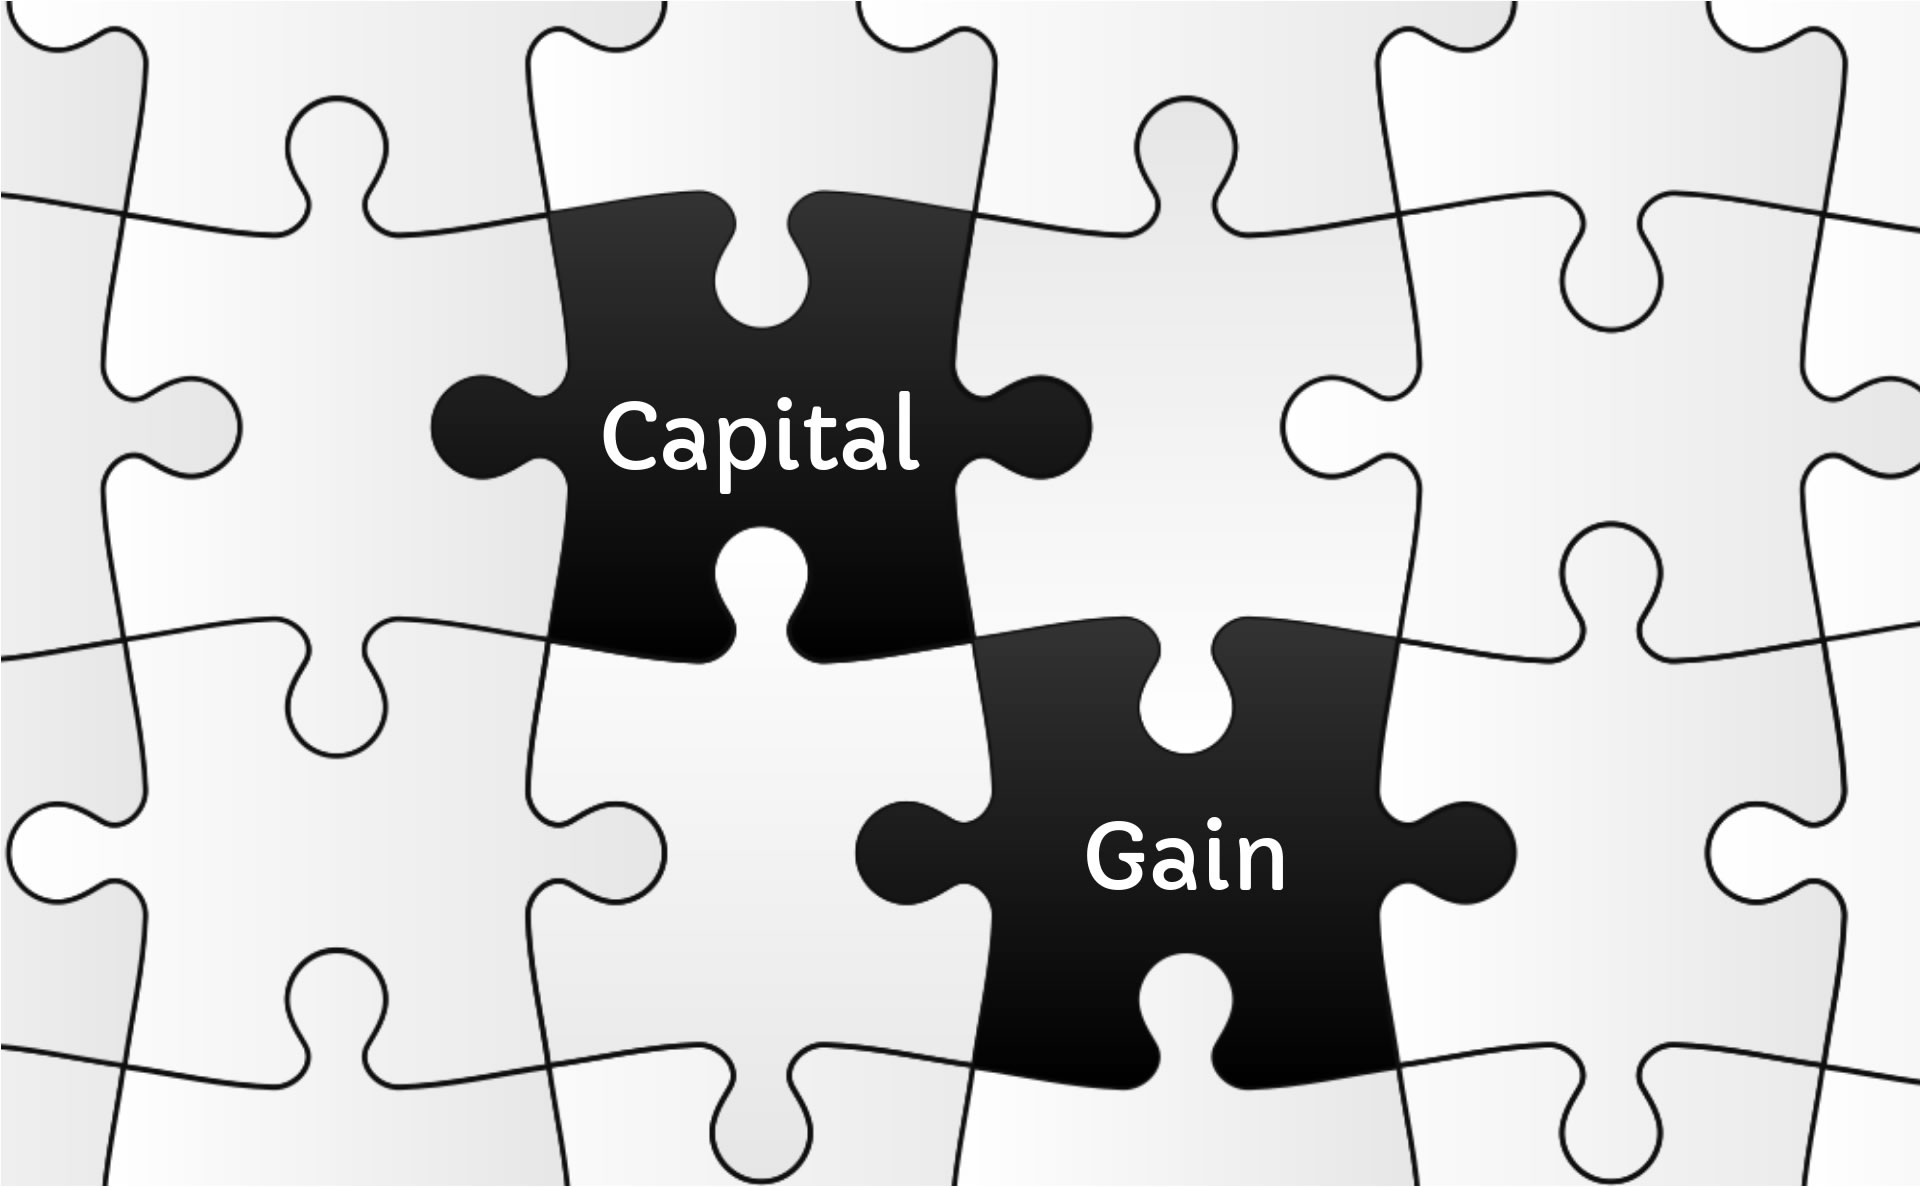 Shows a interlocking jigsaw puzzle pieces. Two of them are black. One is labelled "Capital" and the other is labelled "Gain". "Gain" is one piece to the right and one piece below "Capital". The image is just meant to be decorative.